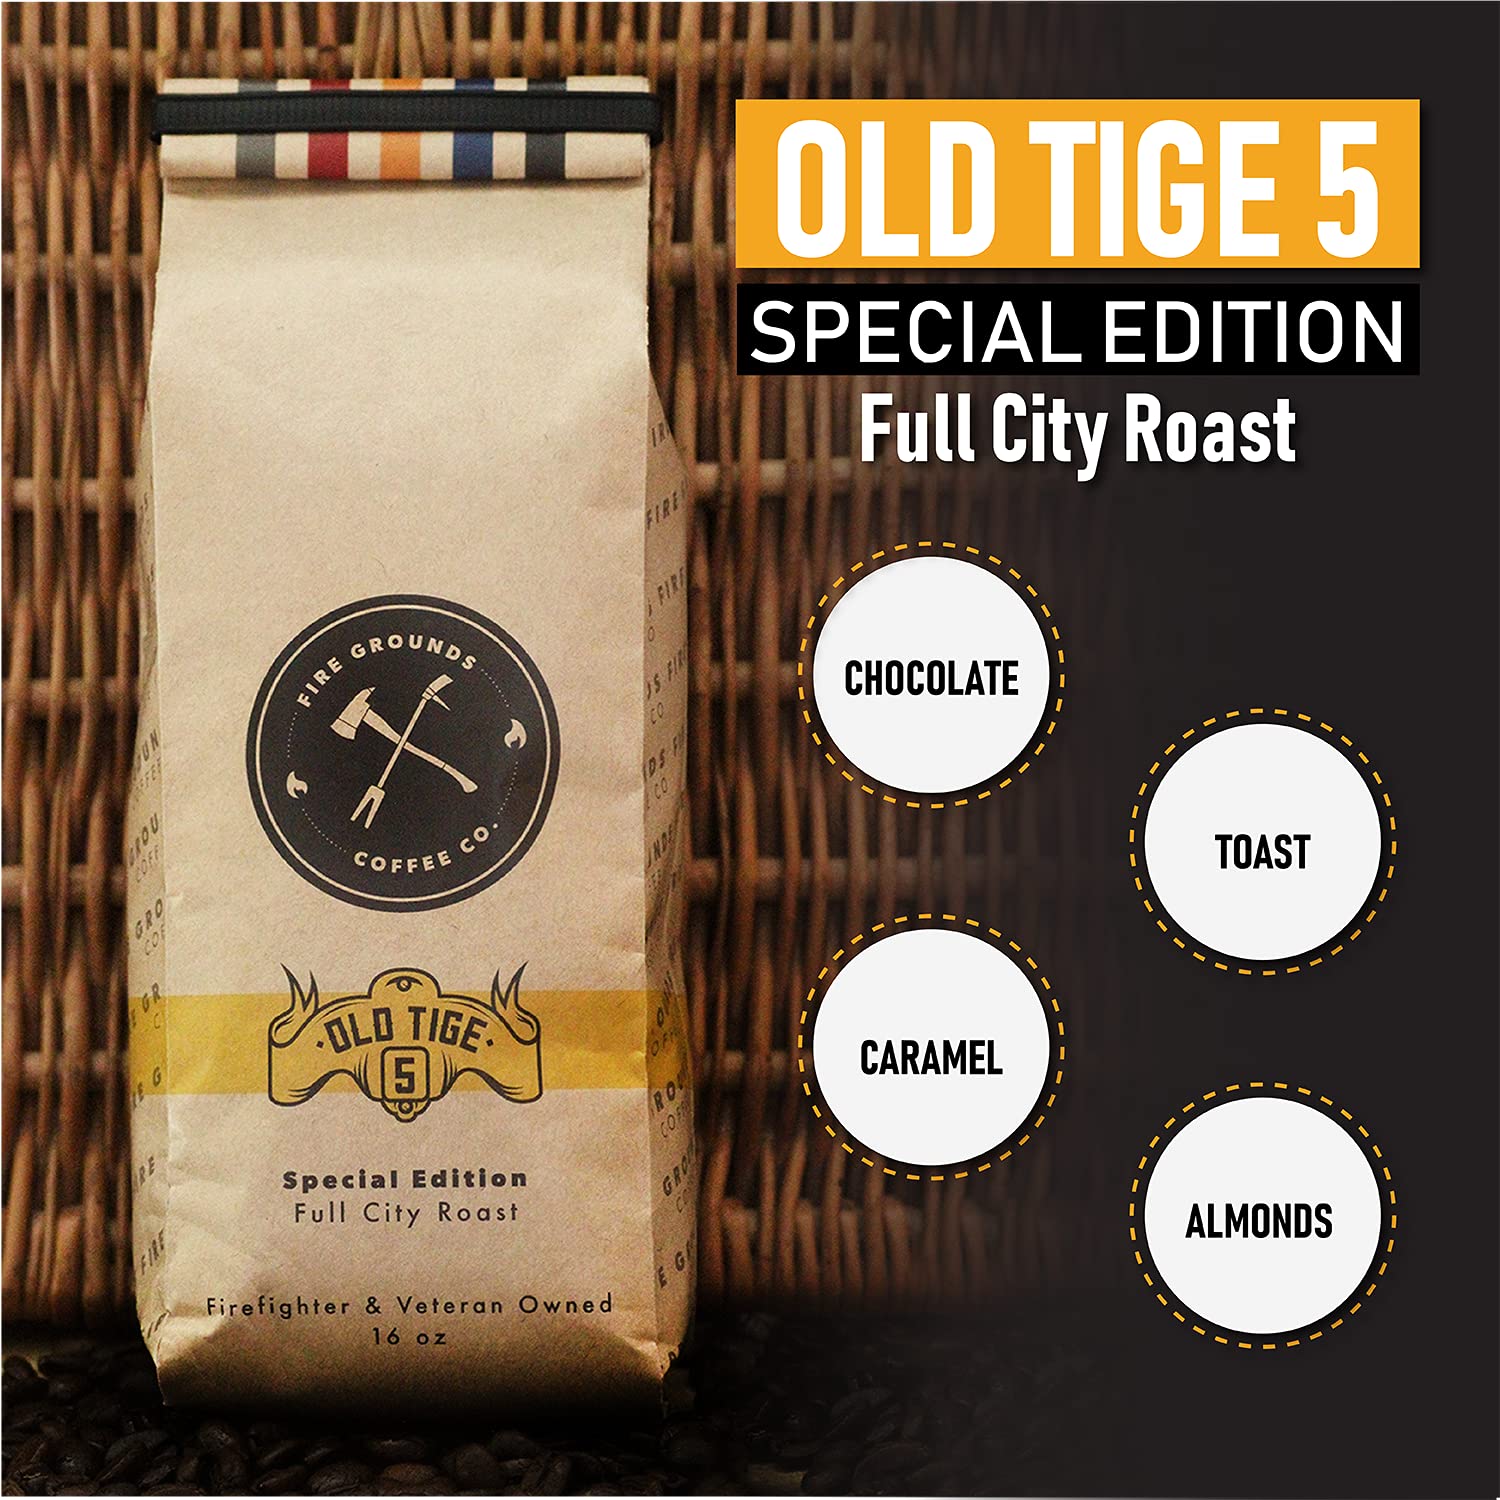 Old Tige 5 (Full City Roast) by fire grounds coffee company